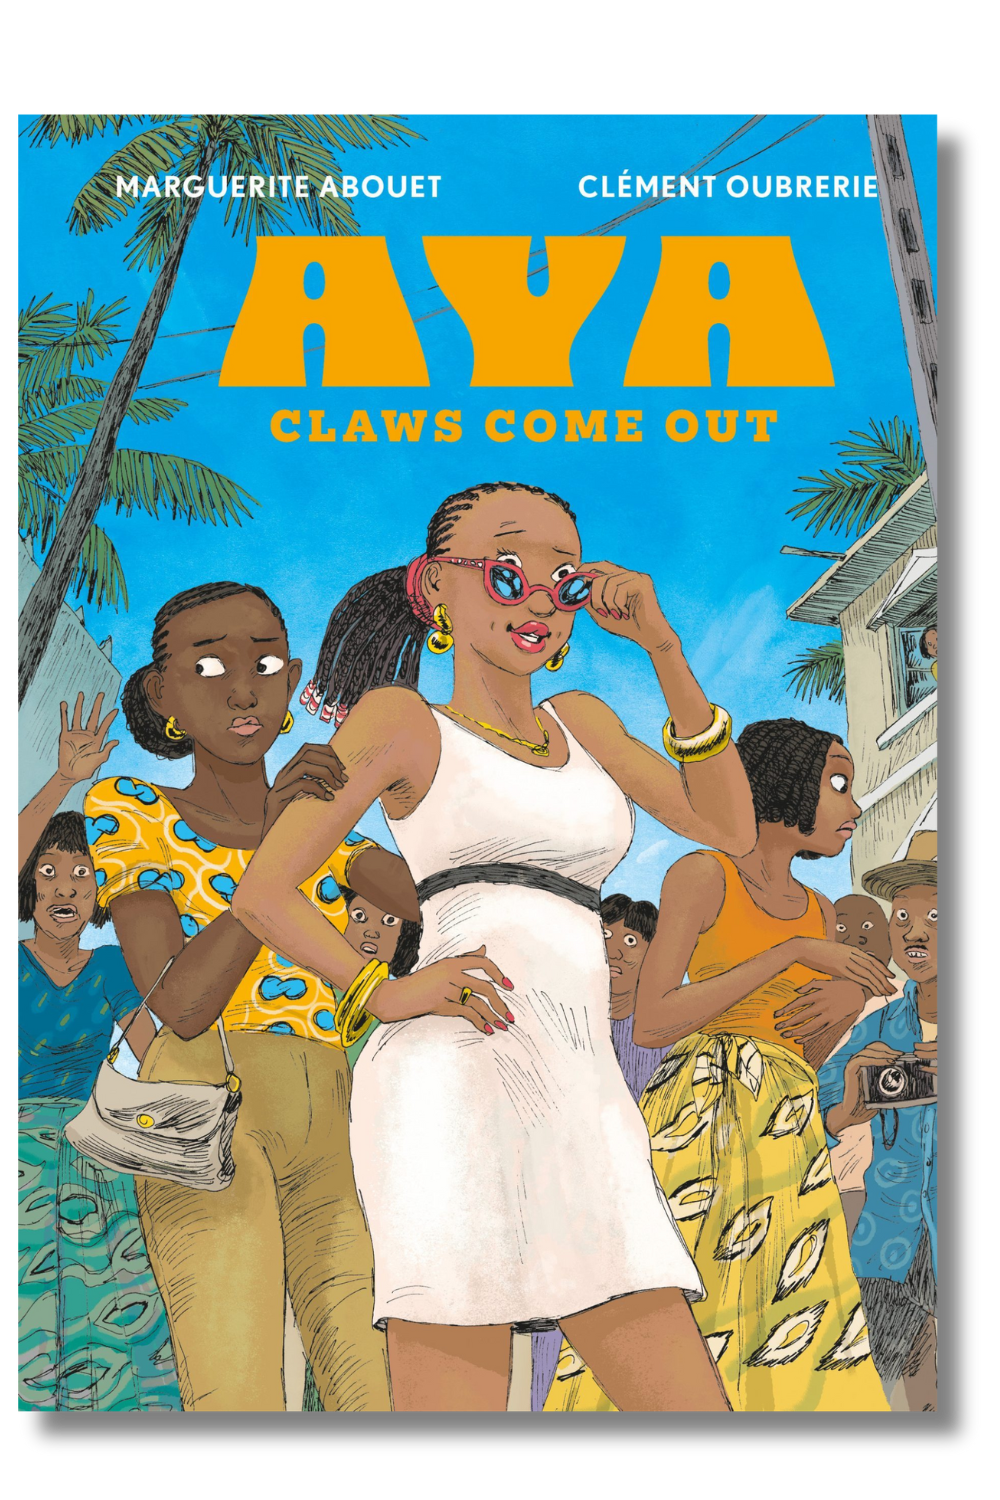 The cover of "Aya: Claws Come Out" by Marguerite Abouet and Clément Oubrerie, tr. by Edwige Dro